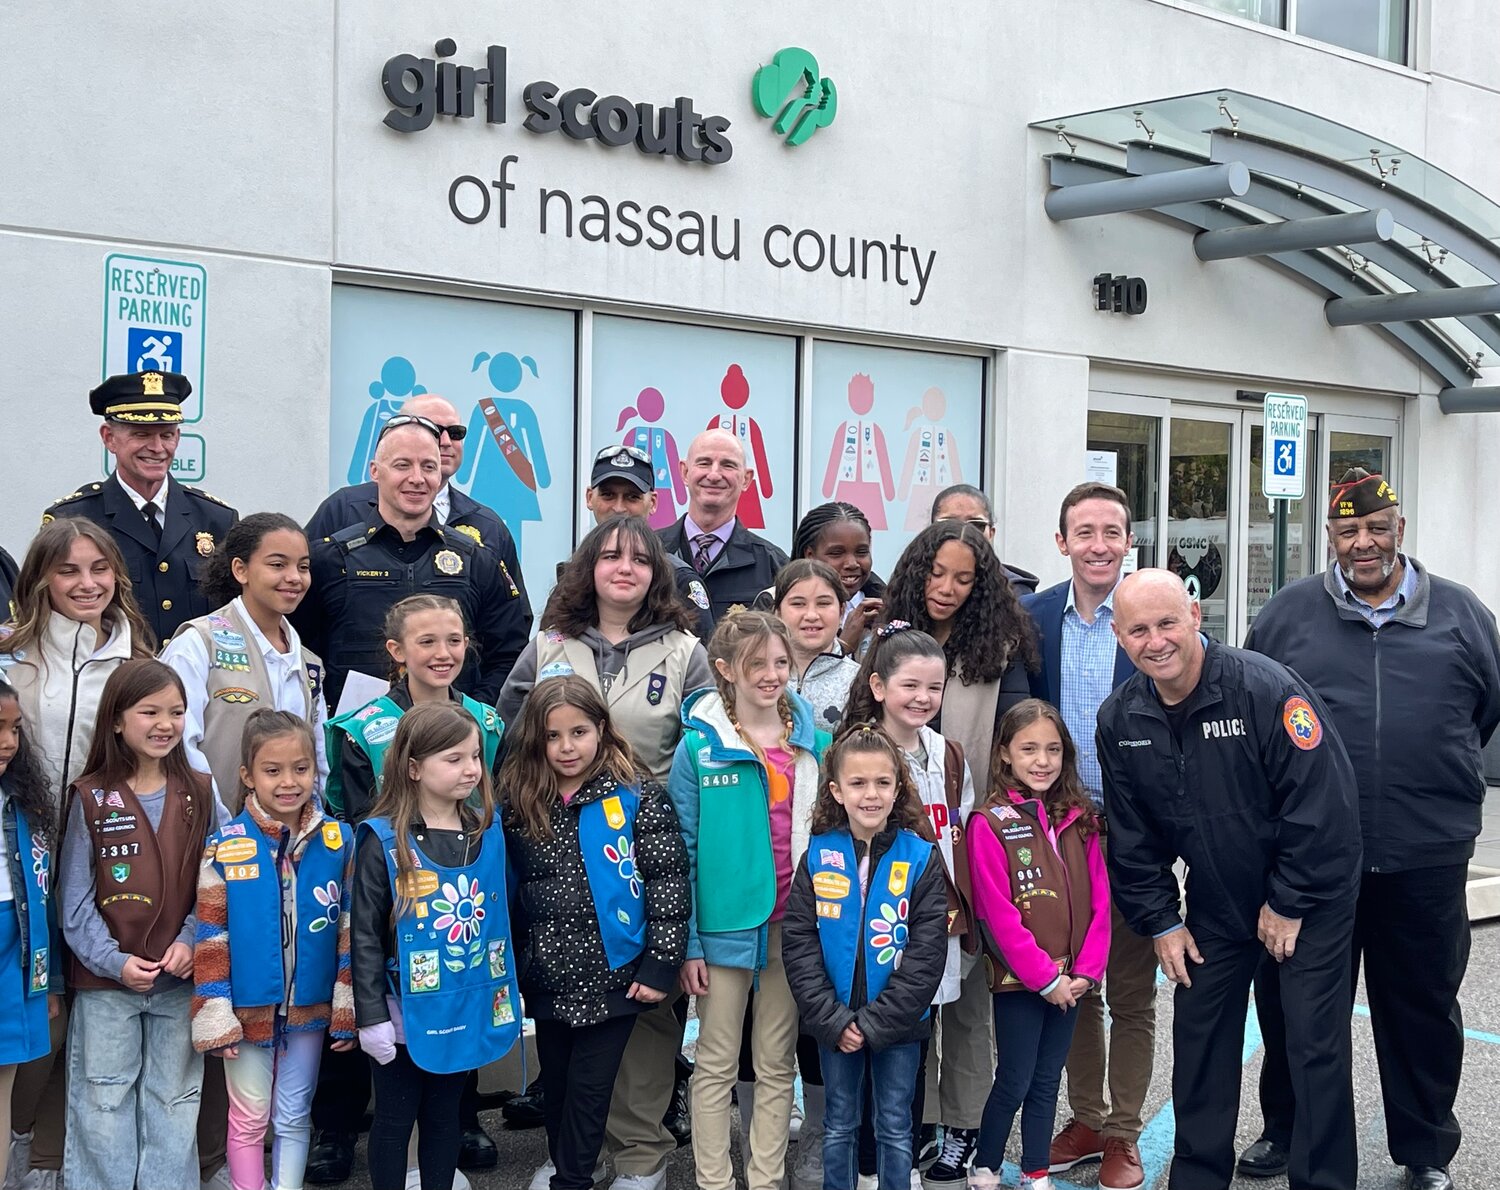 three Girl Scouts from North Bellmore, Aria Williams, Arianna Coutu and her sister, Gemma Coutu, bottom right, participated in a cookie collection for Operation Hometown Hero. They got to meet members of the military, elected officials and dozens of police officers at the Girl Scouts of Nassau County headquarters in Garden City on May 3.